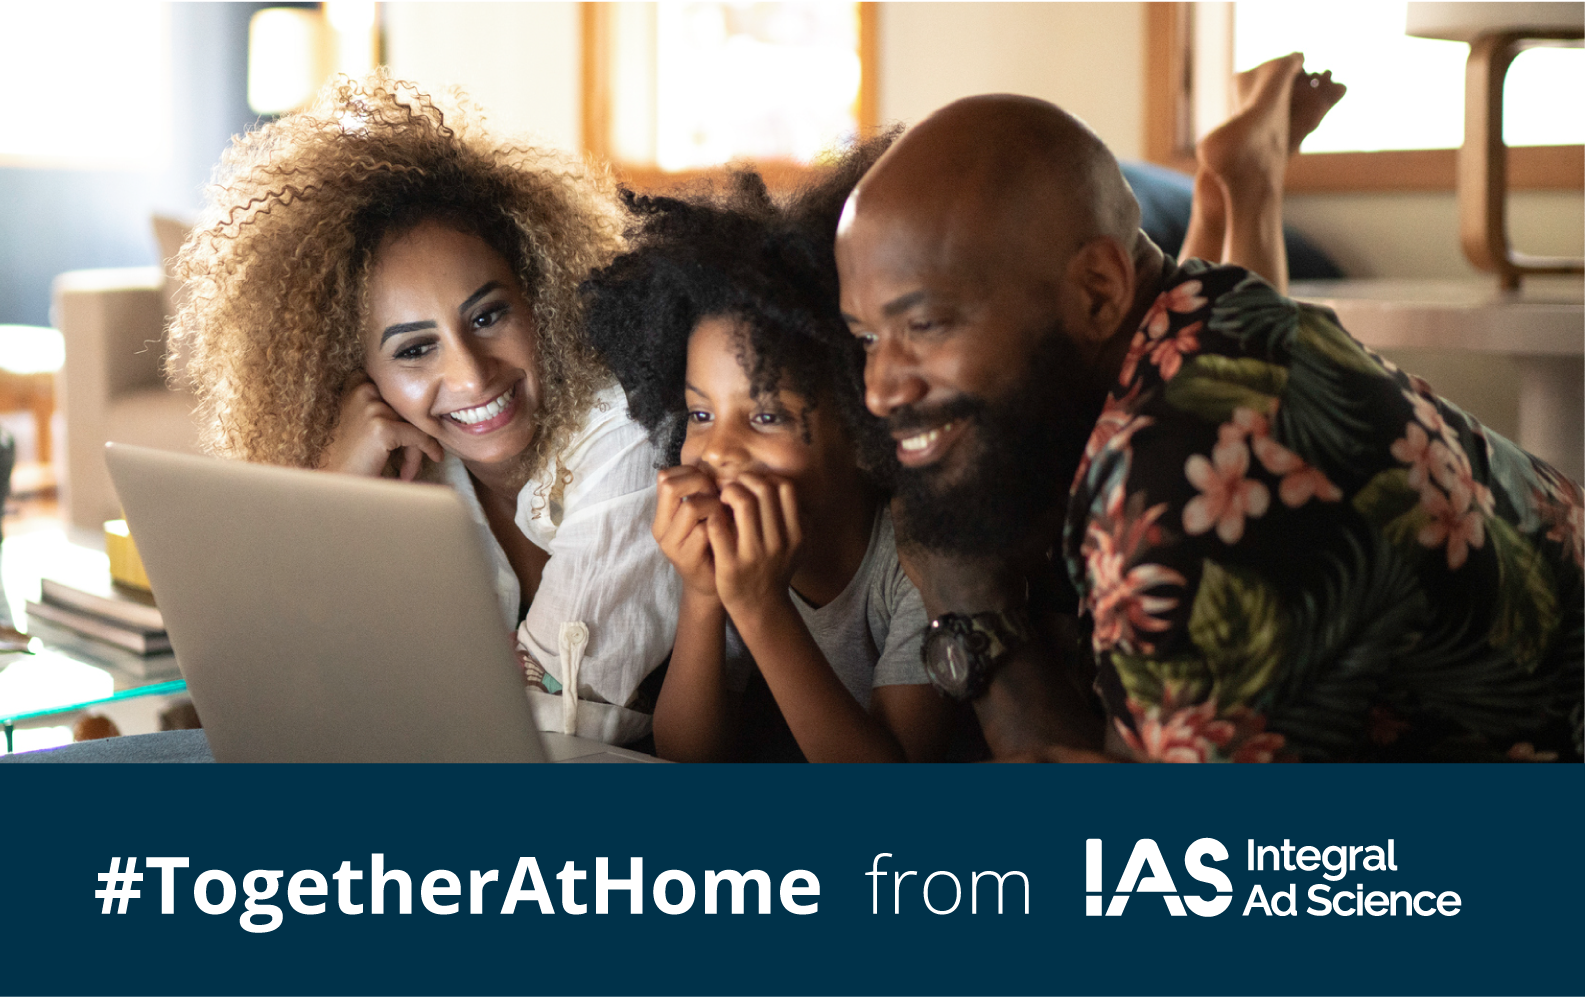 Together at Home: Social media usage while social distancing